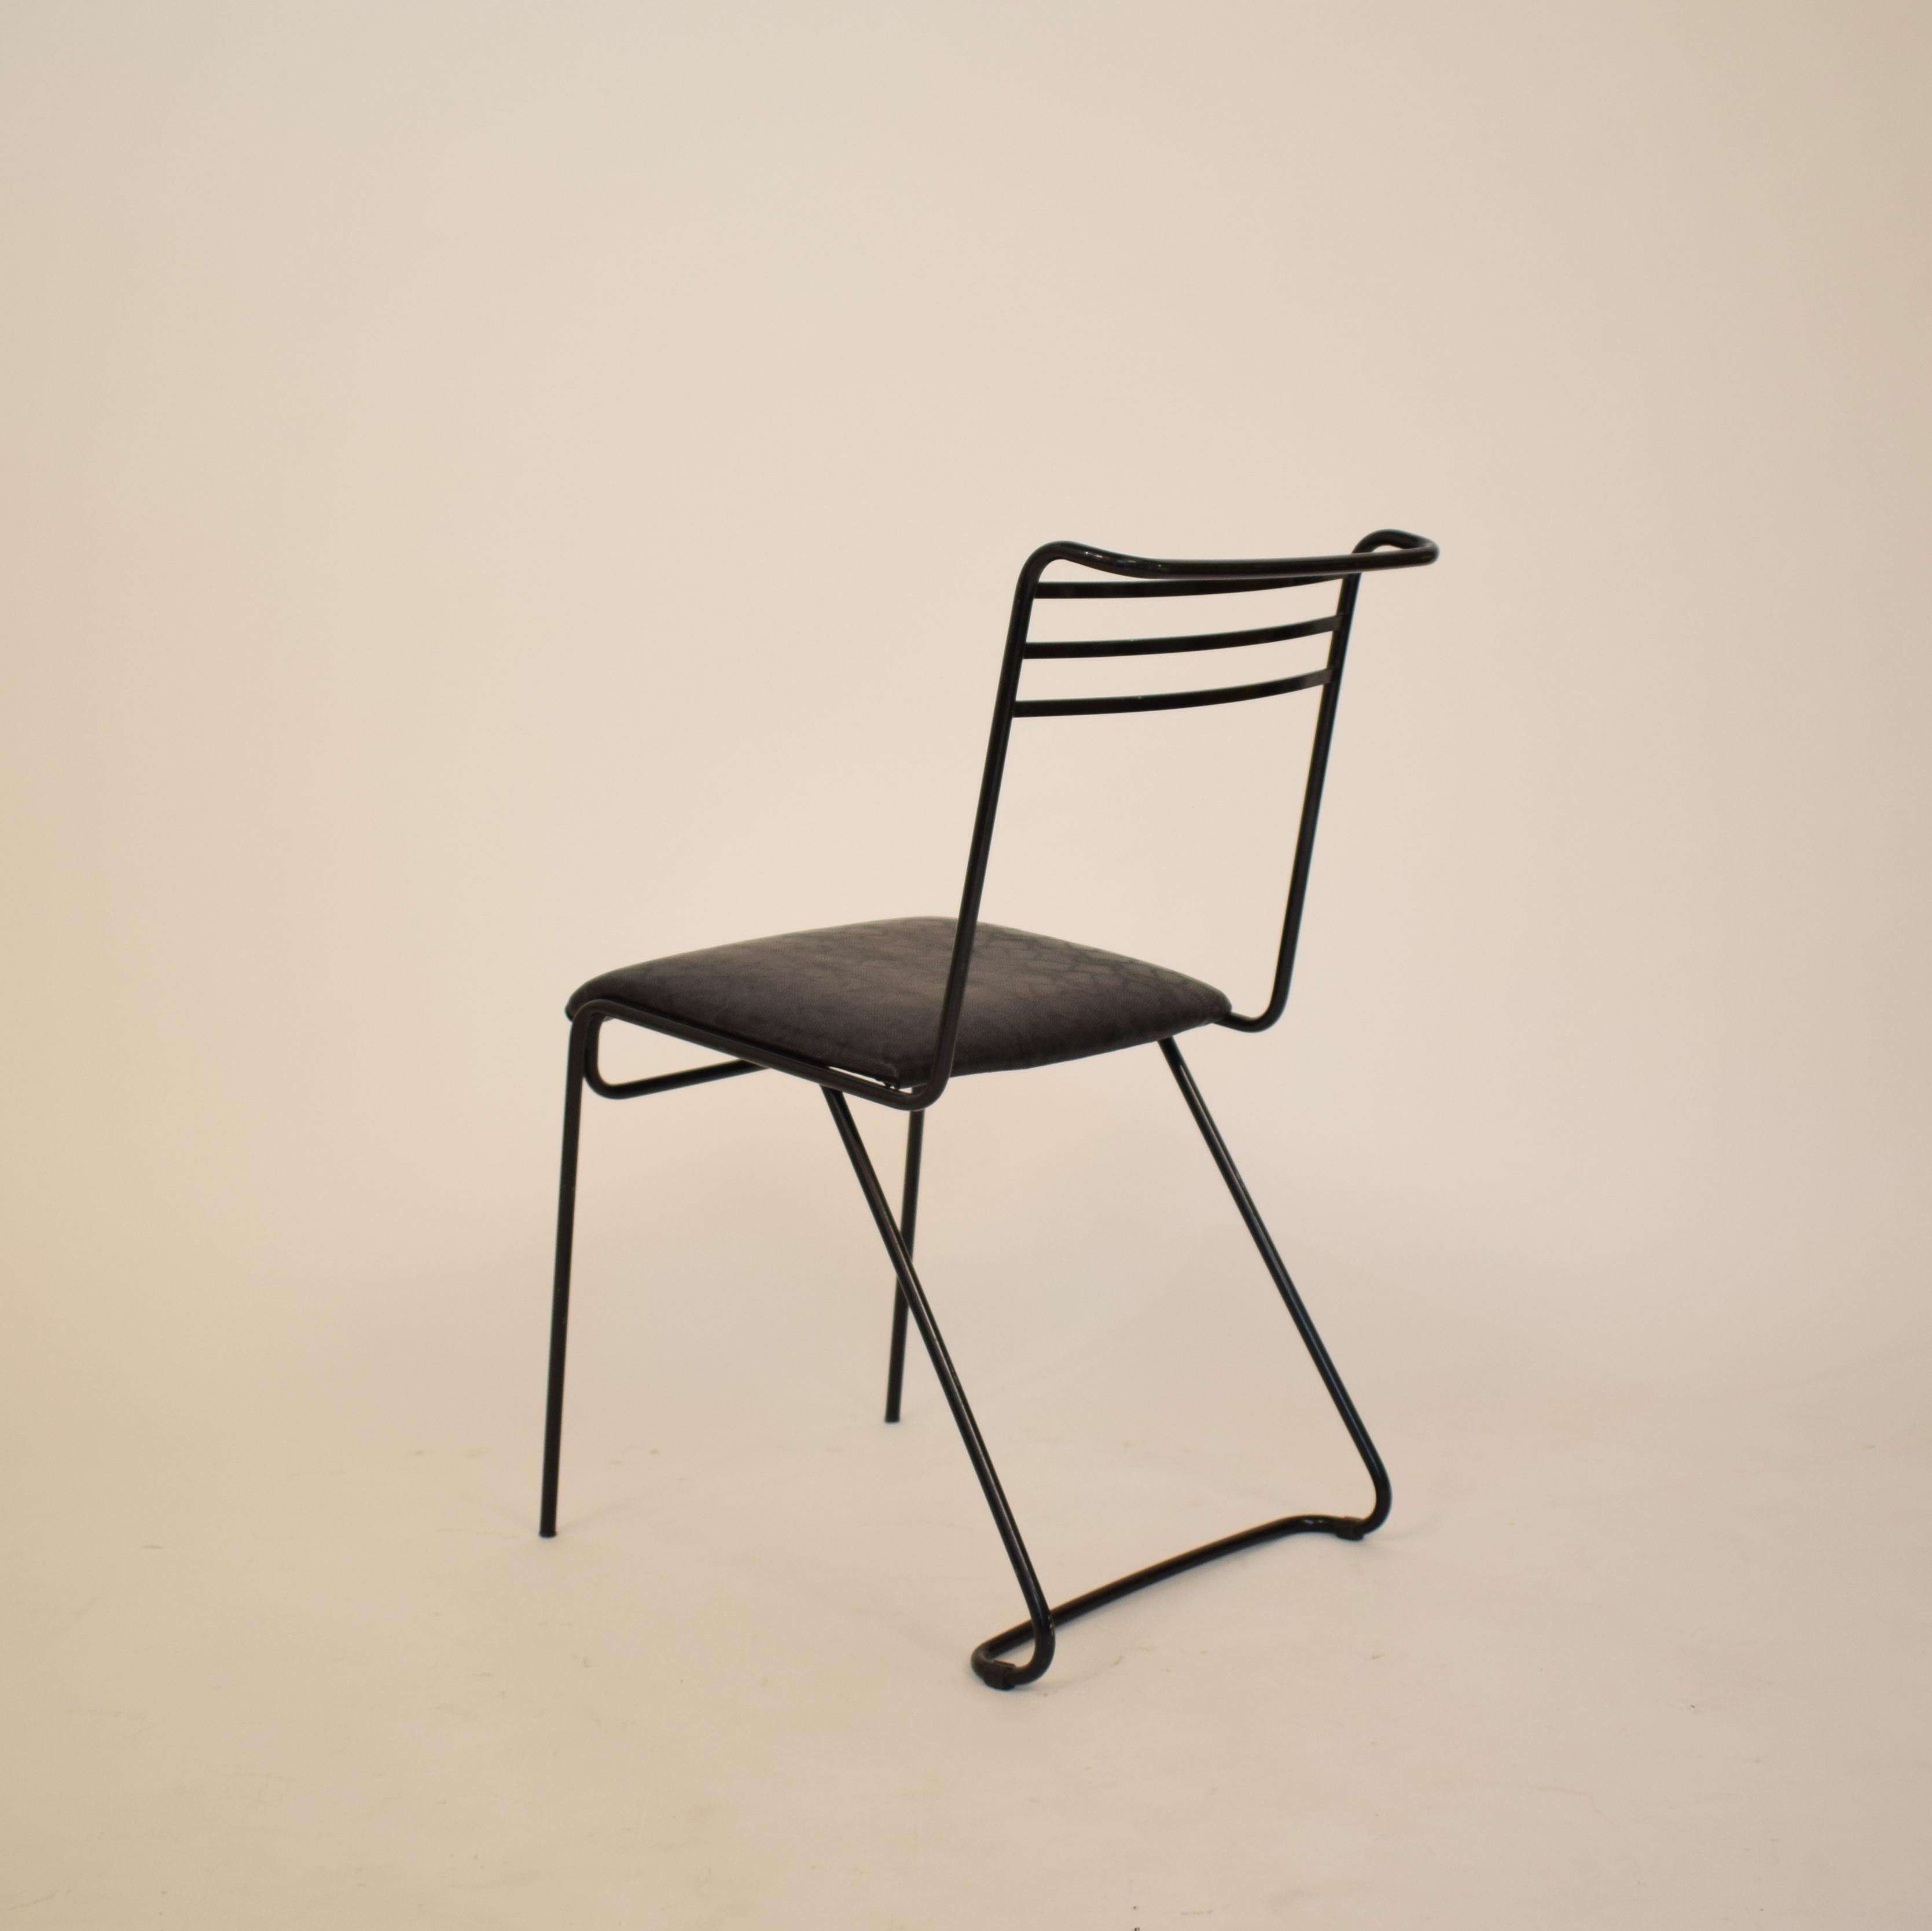 Late 20th Century 1980 Italian Midcentury / Memphis Black Lacquered Metal Chair with Leather Seat